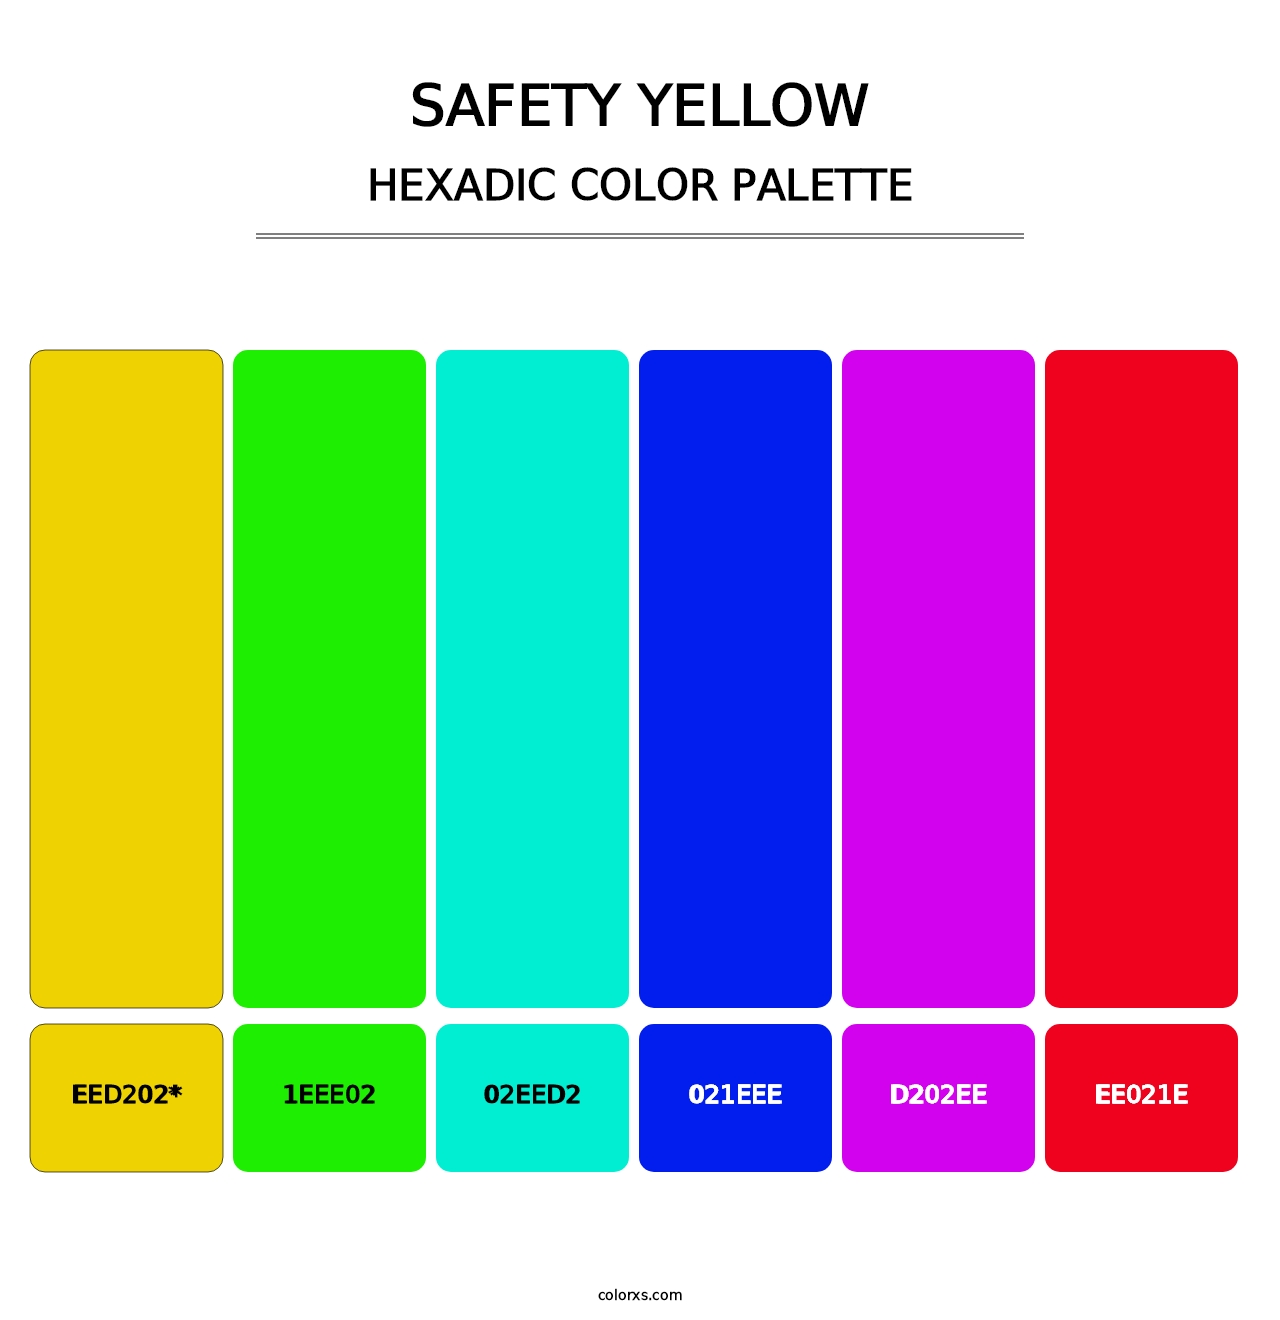 Safety Yellow - Hexadic Color Palette